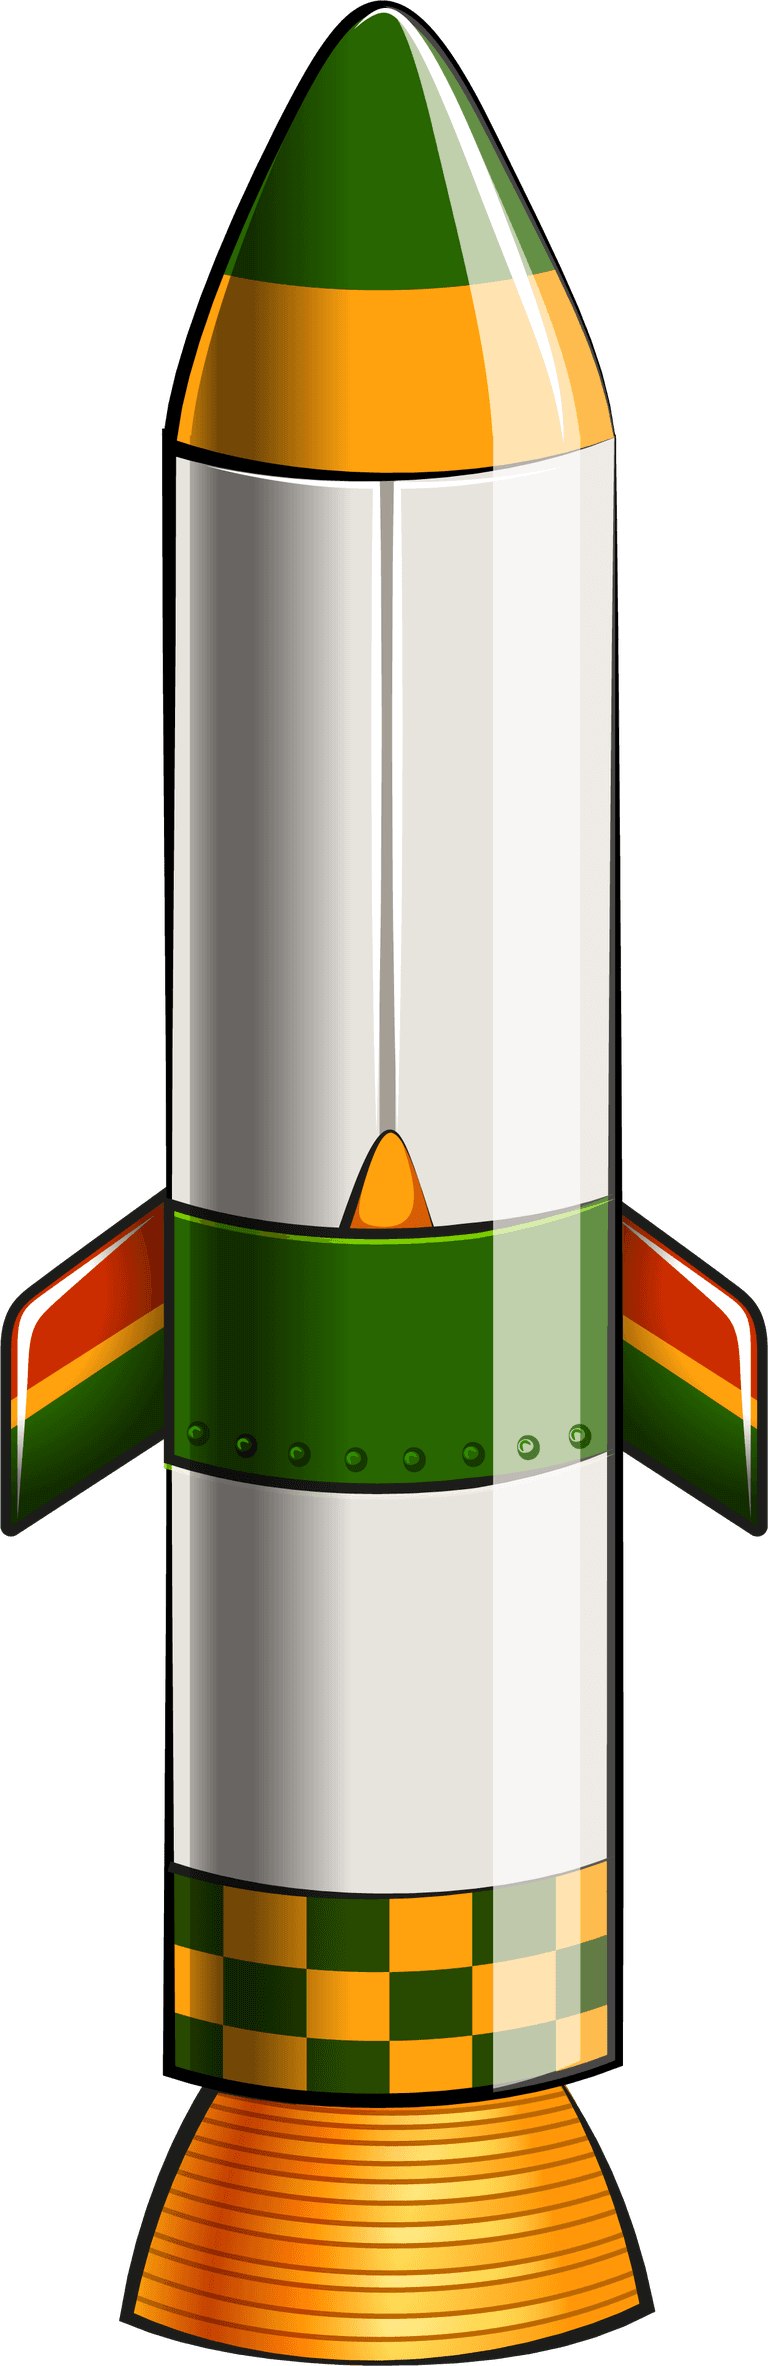 rocket illustration of a group of colorful rockets on a white background